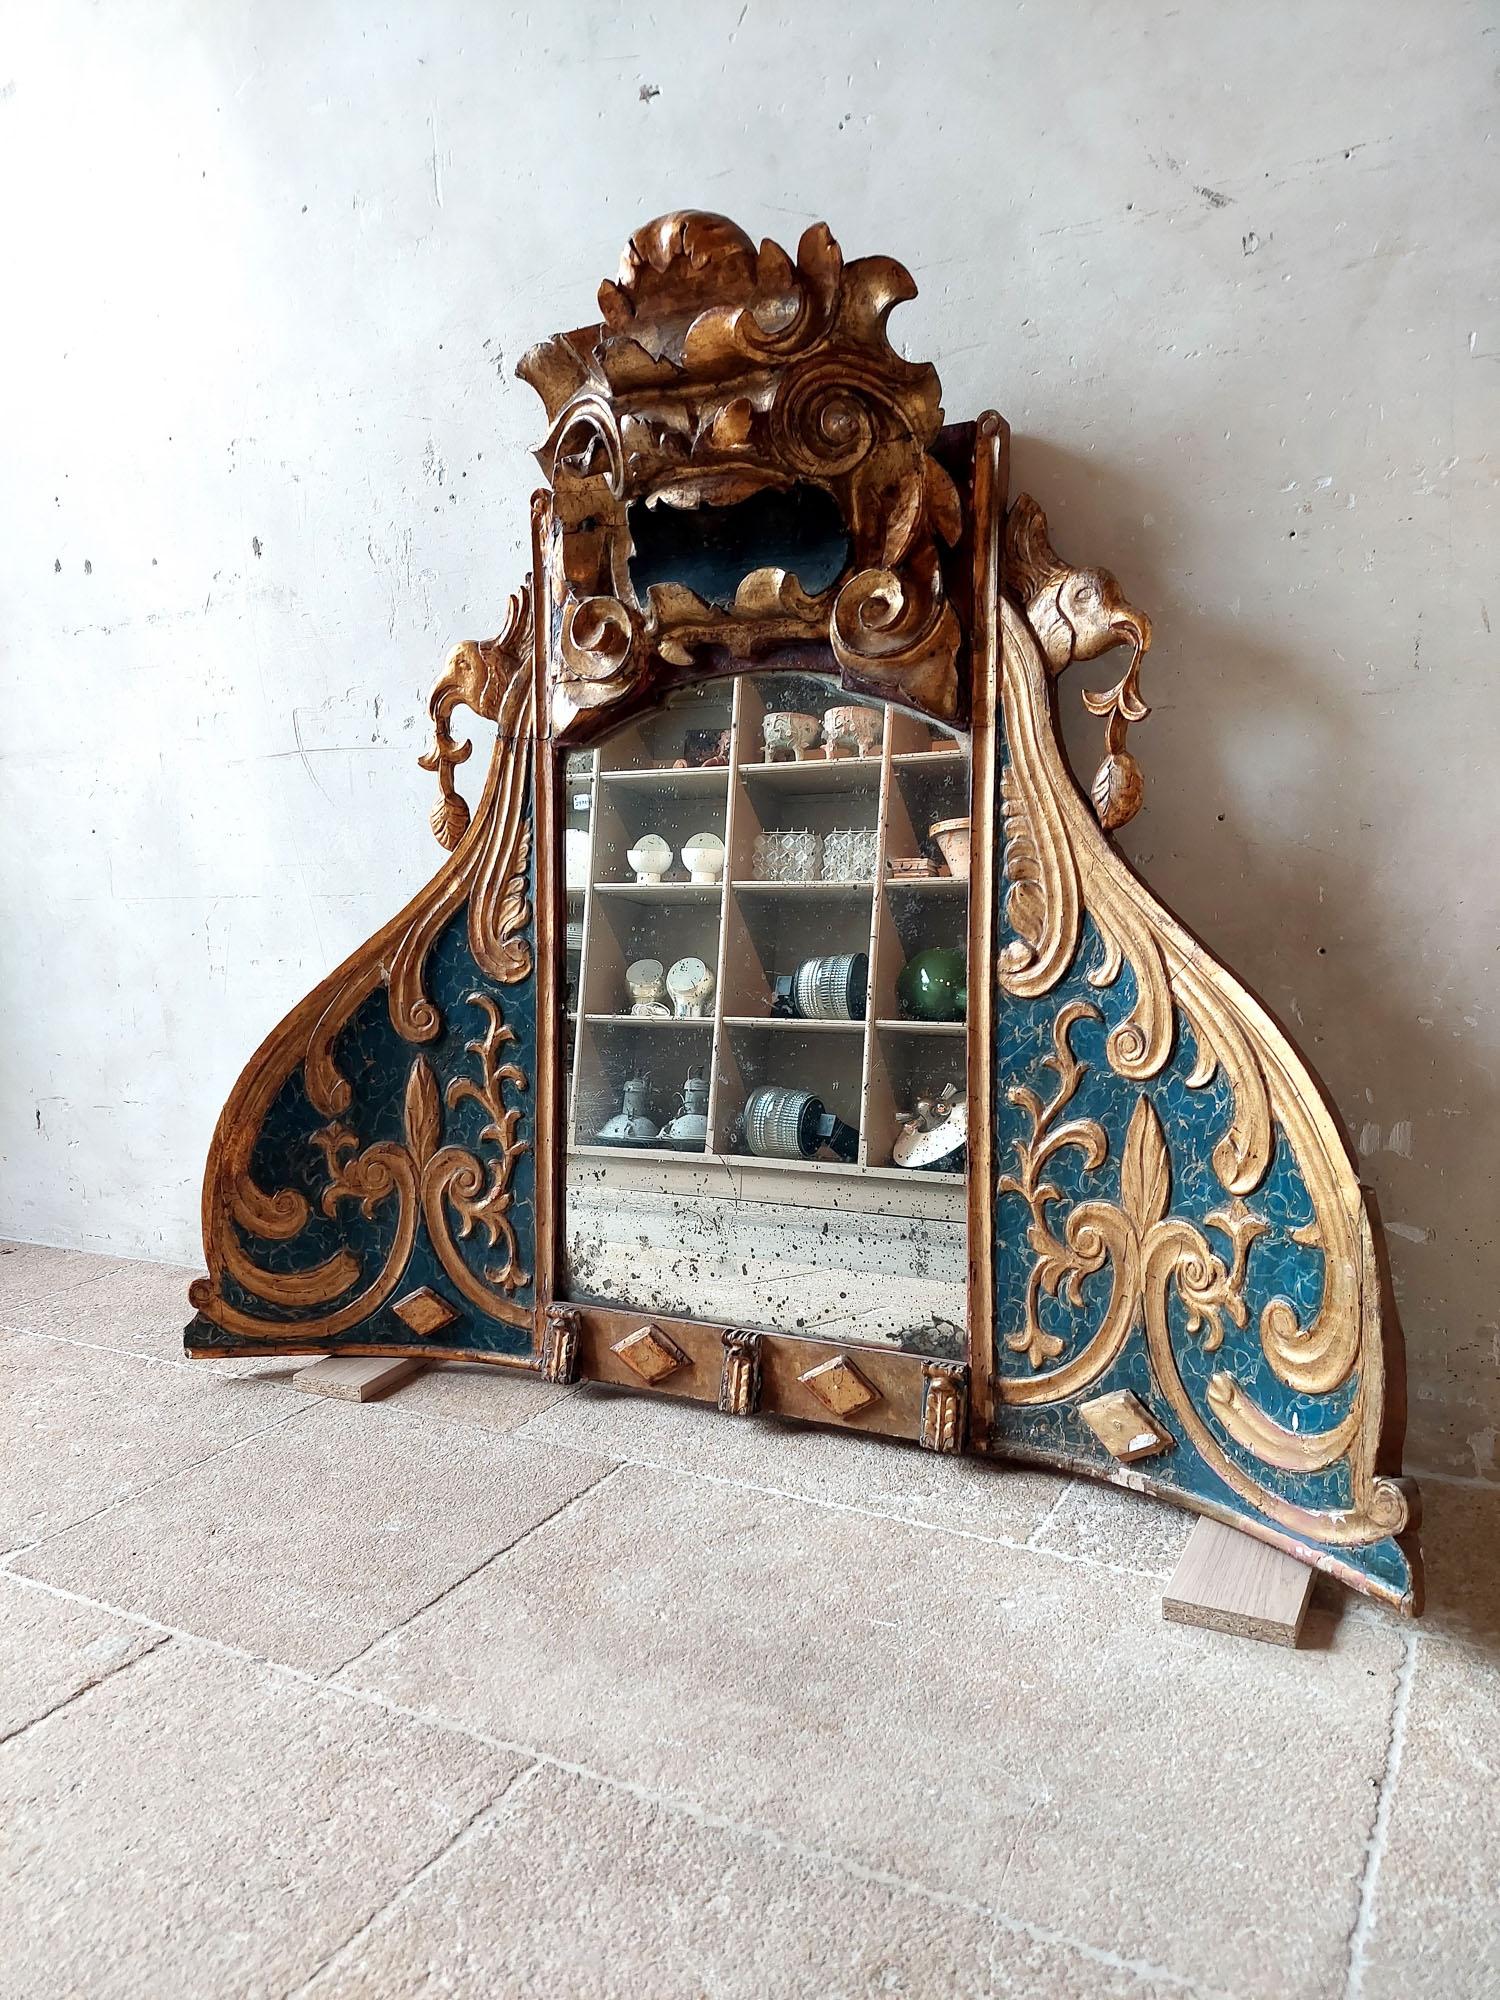 This unique and special mirror is made from an Italian 18th century church niche. The wood-carved frame has a slightly concave shape, and has graceful decorations such as C-shaped curls, diamond shapes, leaves and birds in a beautiful crackle blue